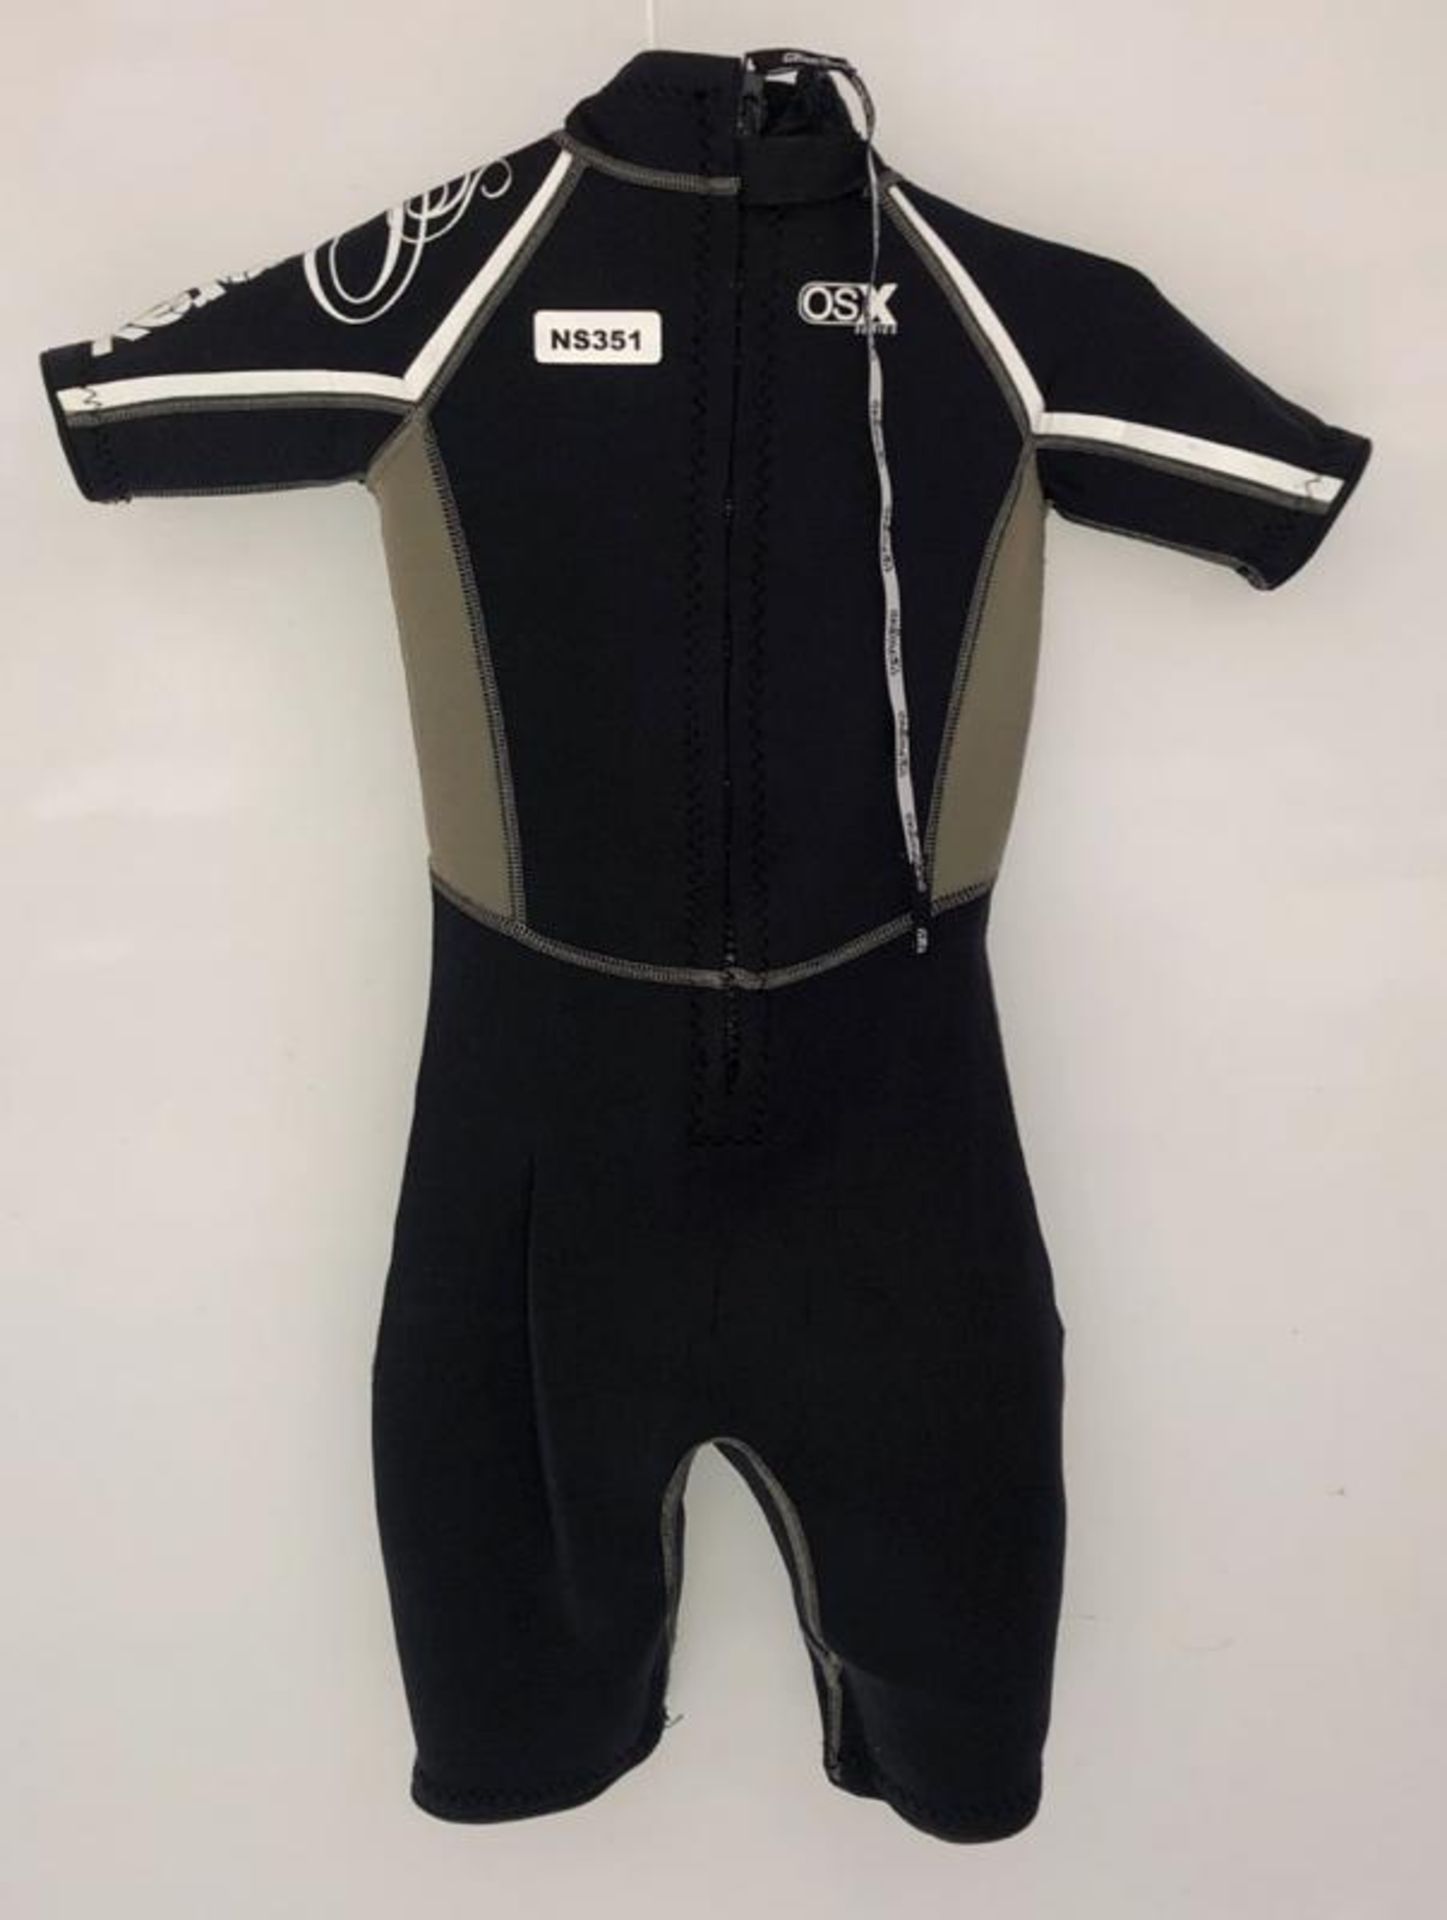 3 x Junior Wetsuit's - Ref: NS349, NS351, NS347 - CL349 - Location: Altrincham WA14 - Used In Good C - Image 8 of 10